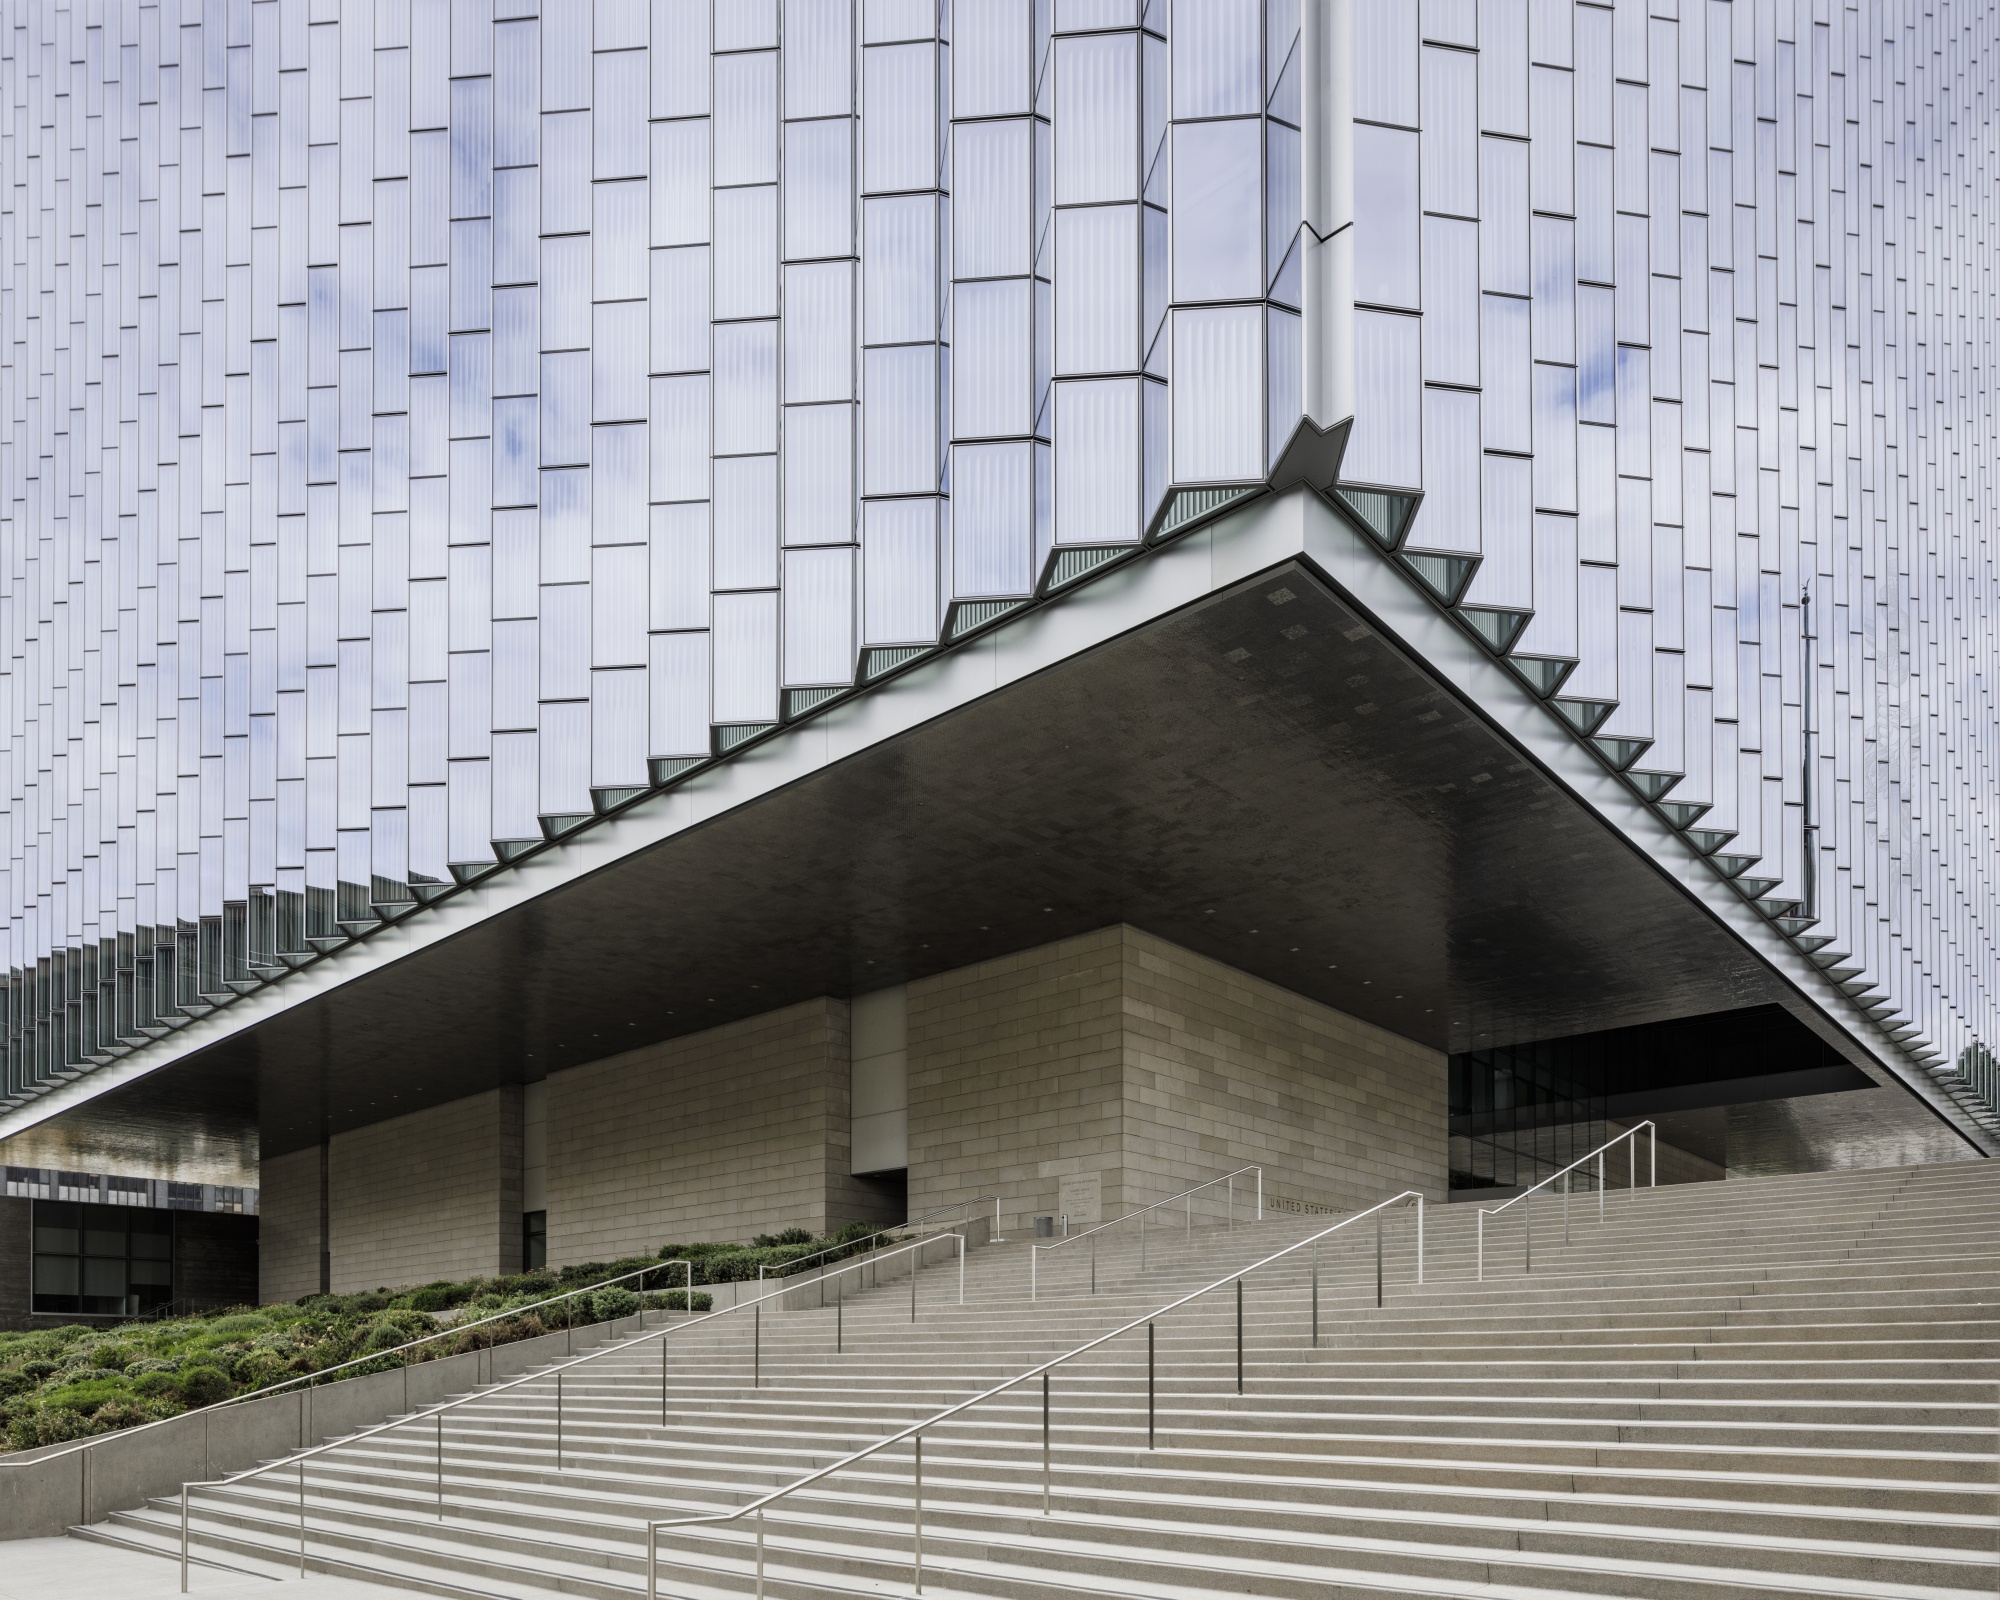 The New United States Court House in Los Angeles, designed by Skidmore, Owings &amp; Merrill and completed in 2016, draws from classical design principles. But its modernist elements would be frowned up under current GSA guidelines.&nbsp;